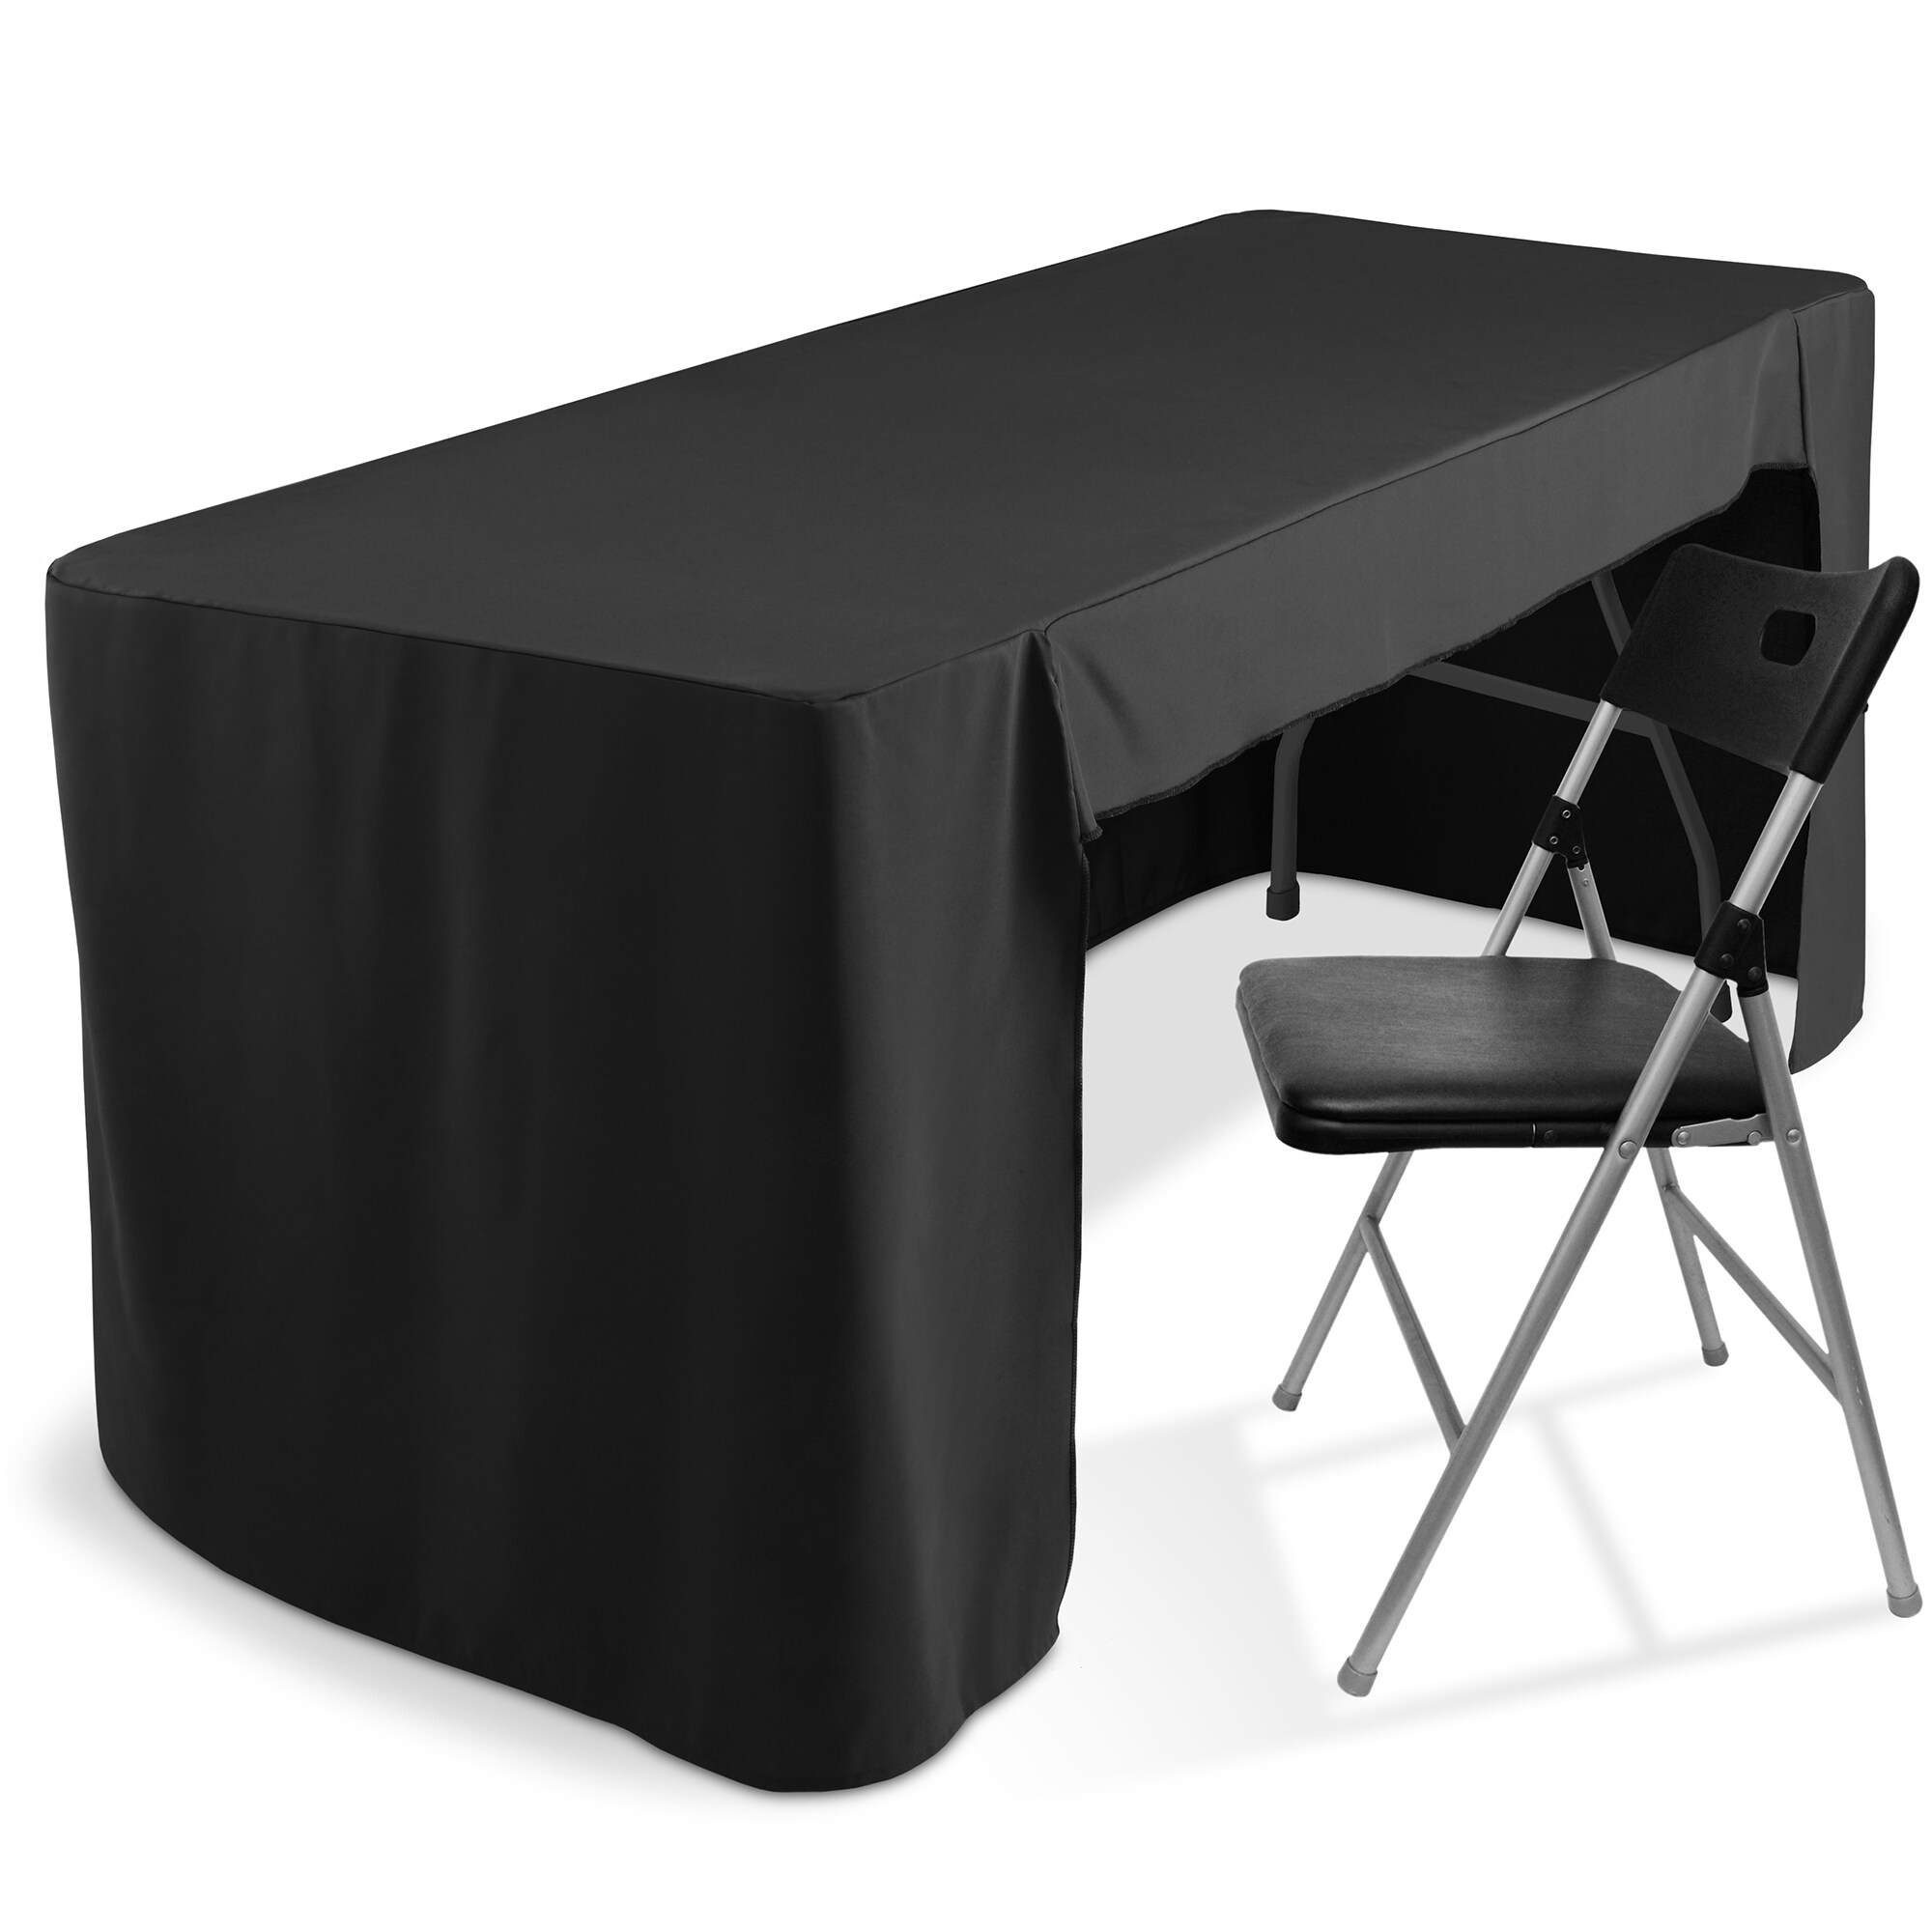 https://ak1.ostkcdn.com/images/products/is/images/direct/71e4a55f4fdca3b53b2ec67b402e2b965d17eba8/6%27-Fitted-Tablecloth-with-Open-Back---Trade-Show-Table-Cover.jpg